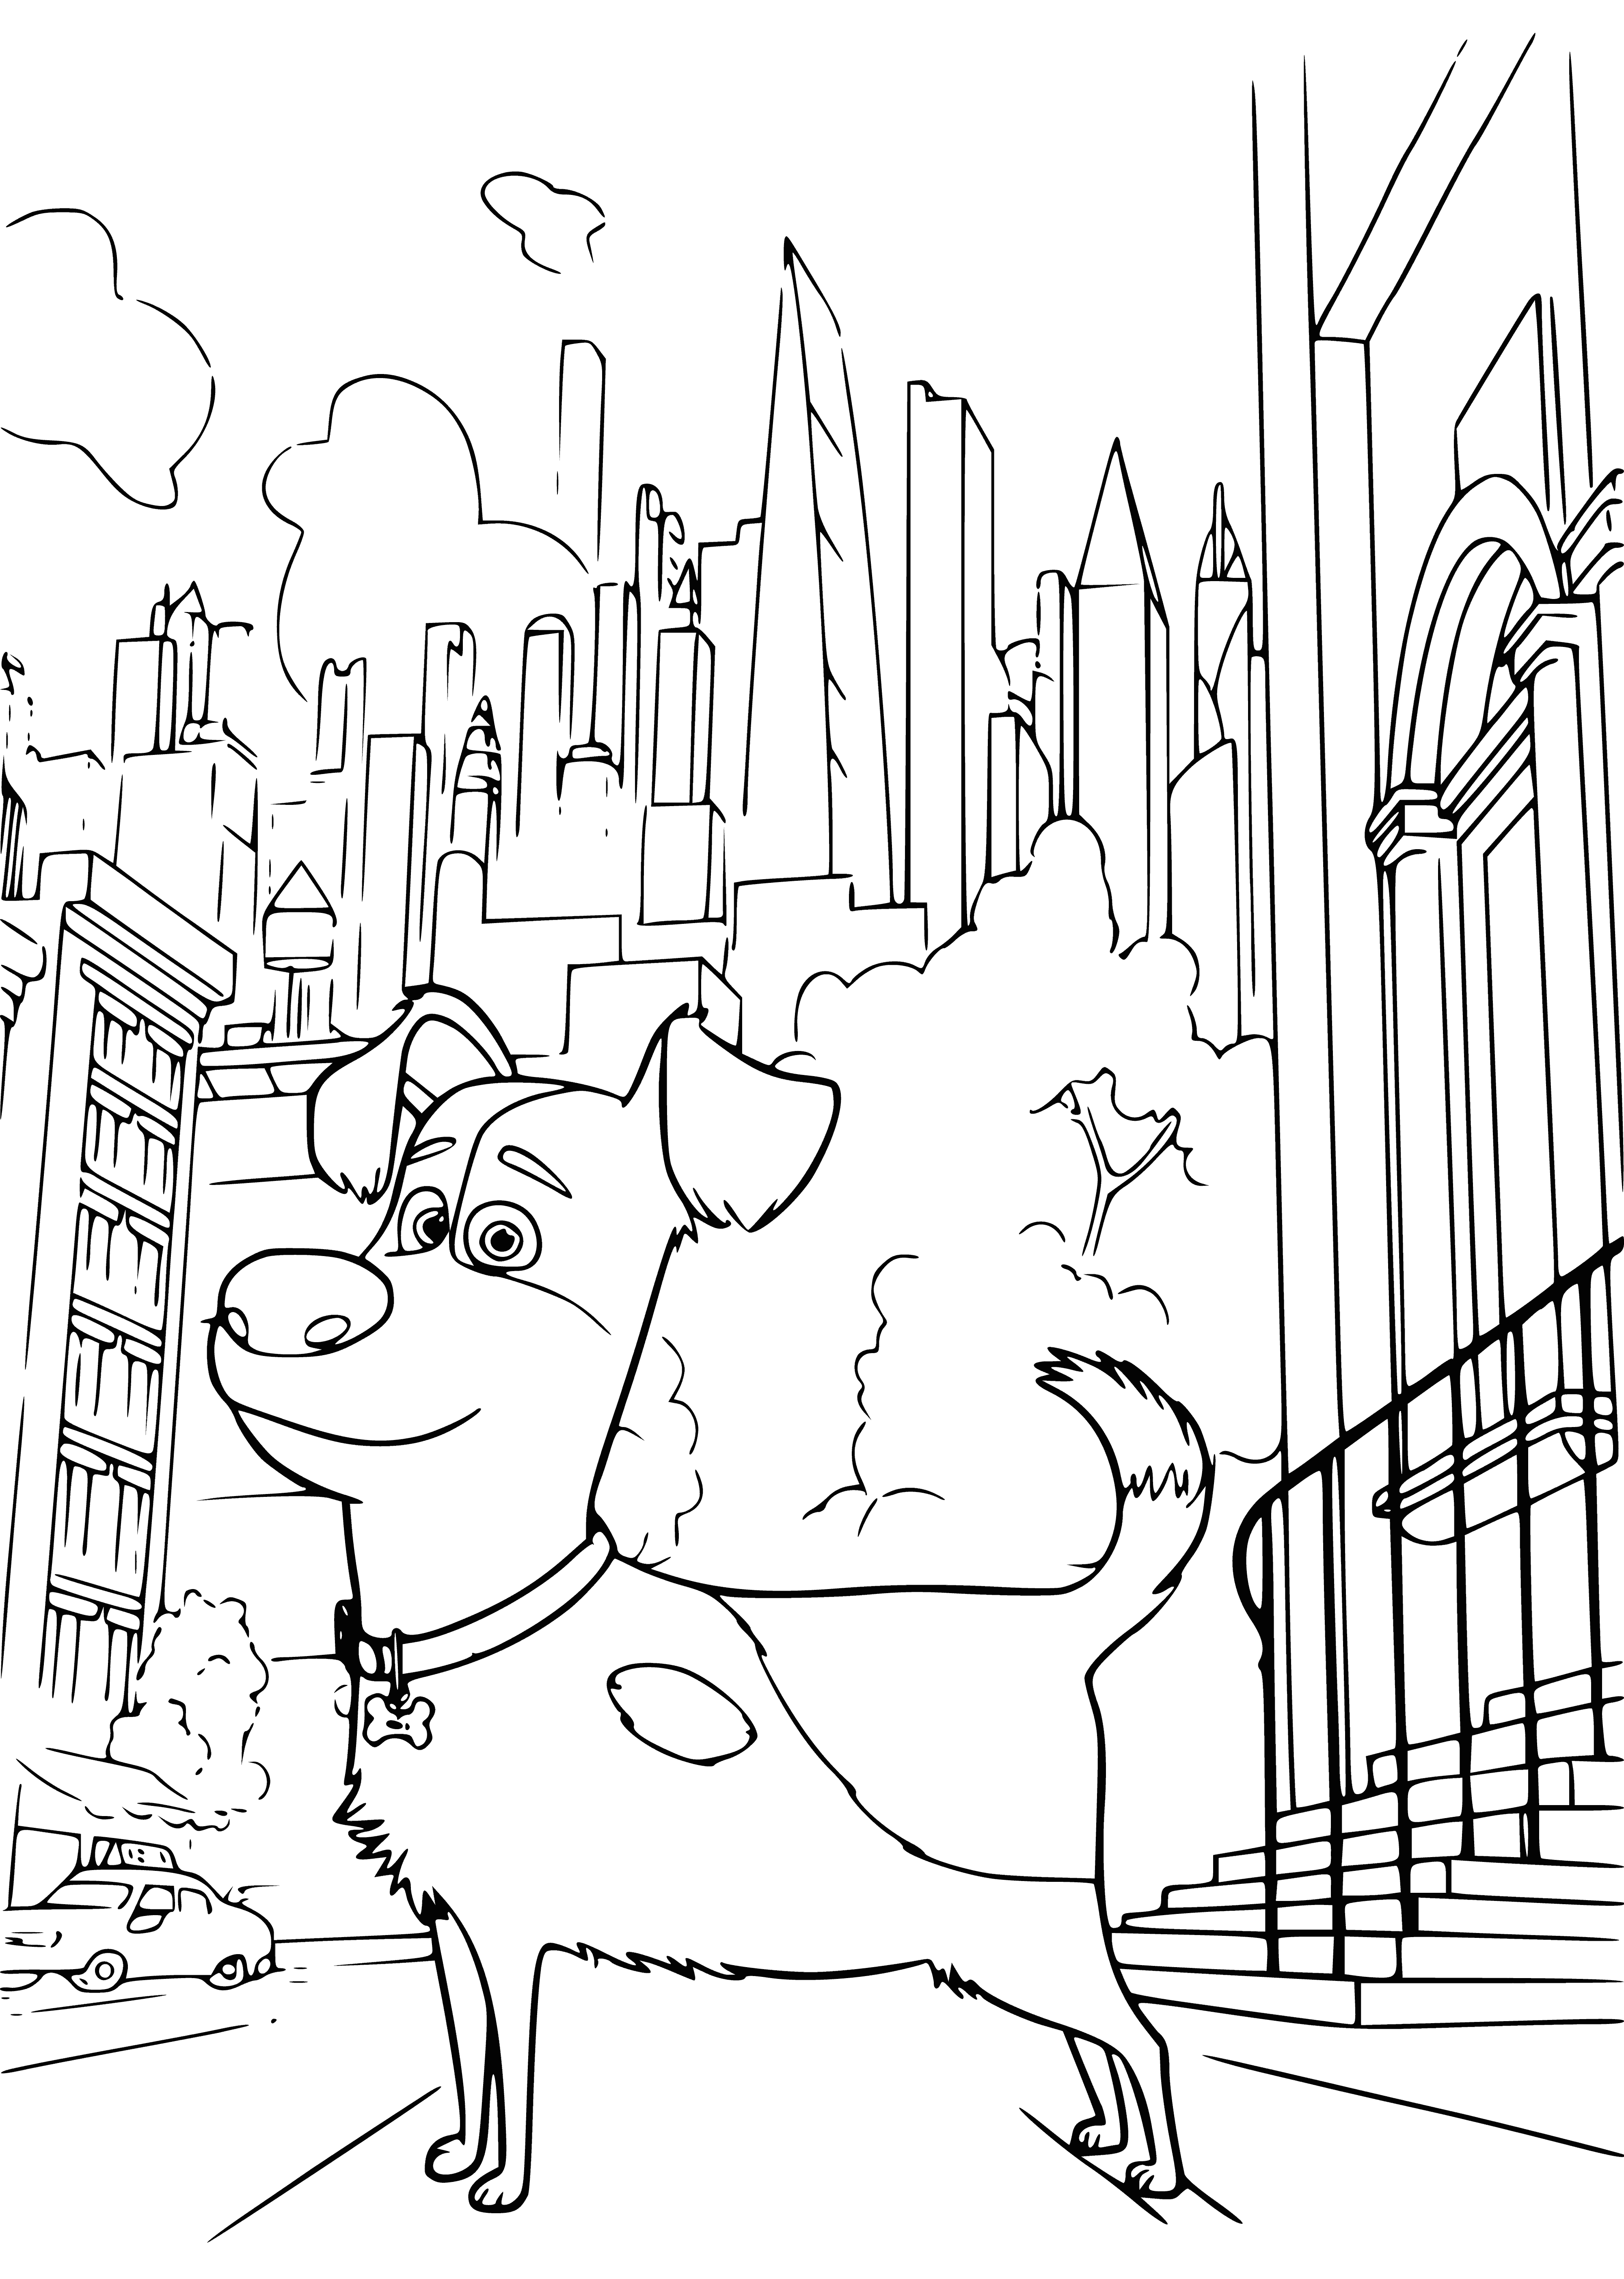 coloring page: Dog walks down the sidewalk by a busy road: brown and white, black nose, wearing a collar and leash. Cars drive by, people walk.